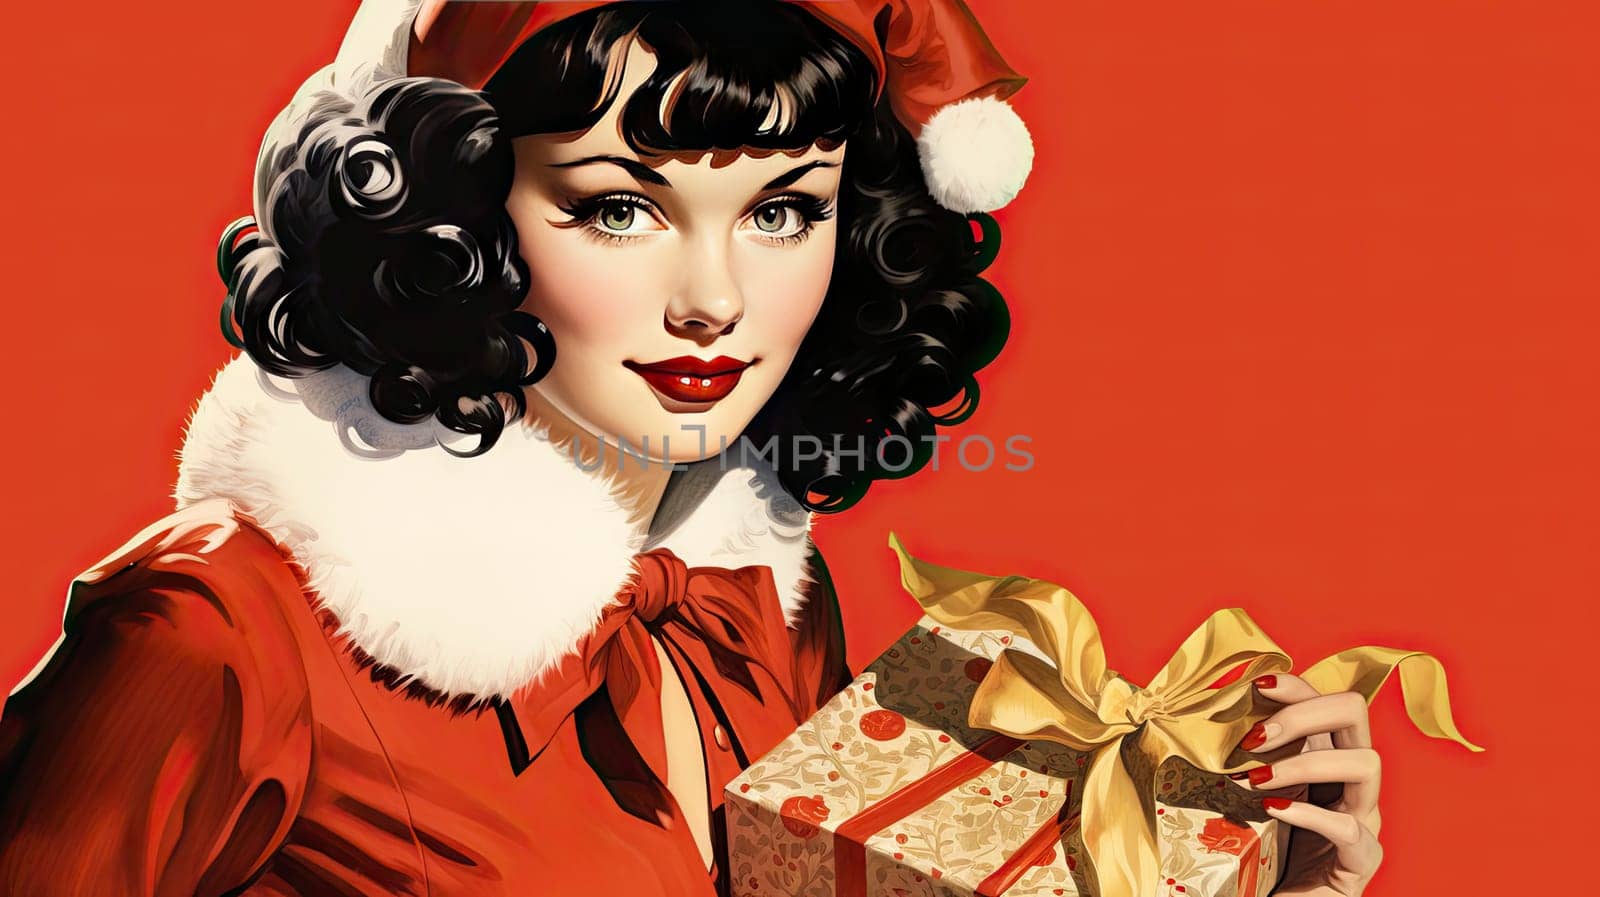 Beautiful pinup girl dressed as Santa Claus with gifts. by jbruiz78